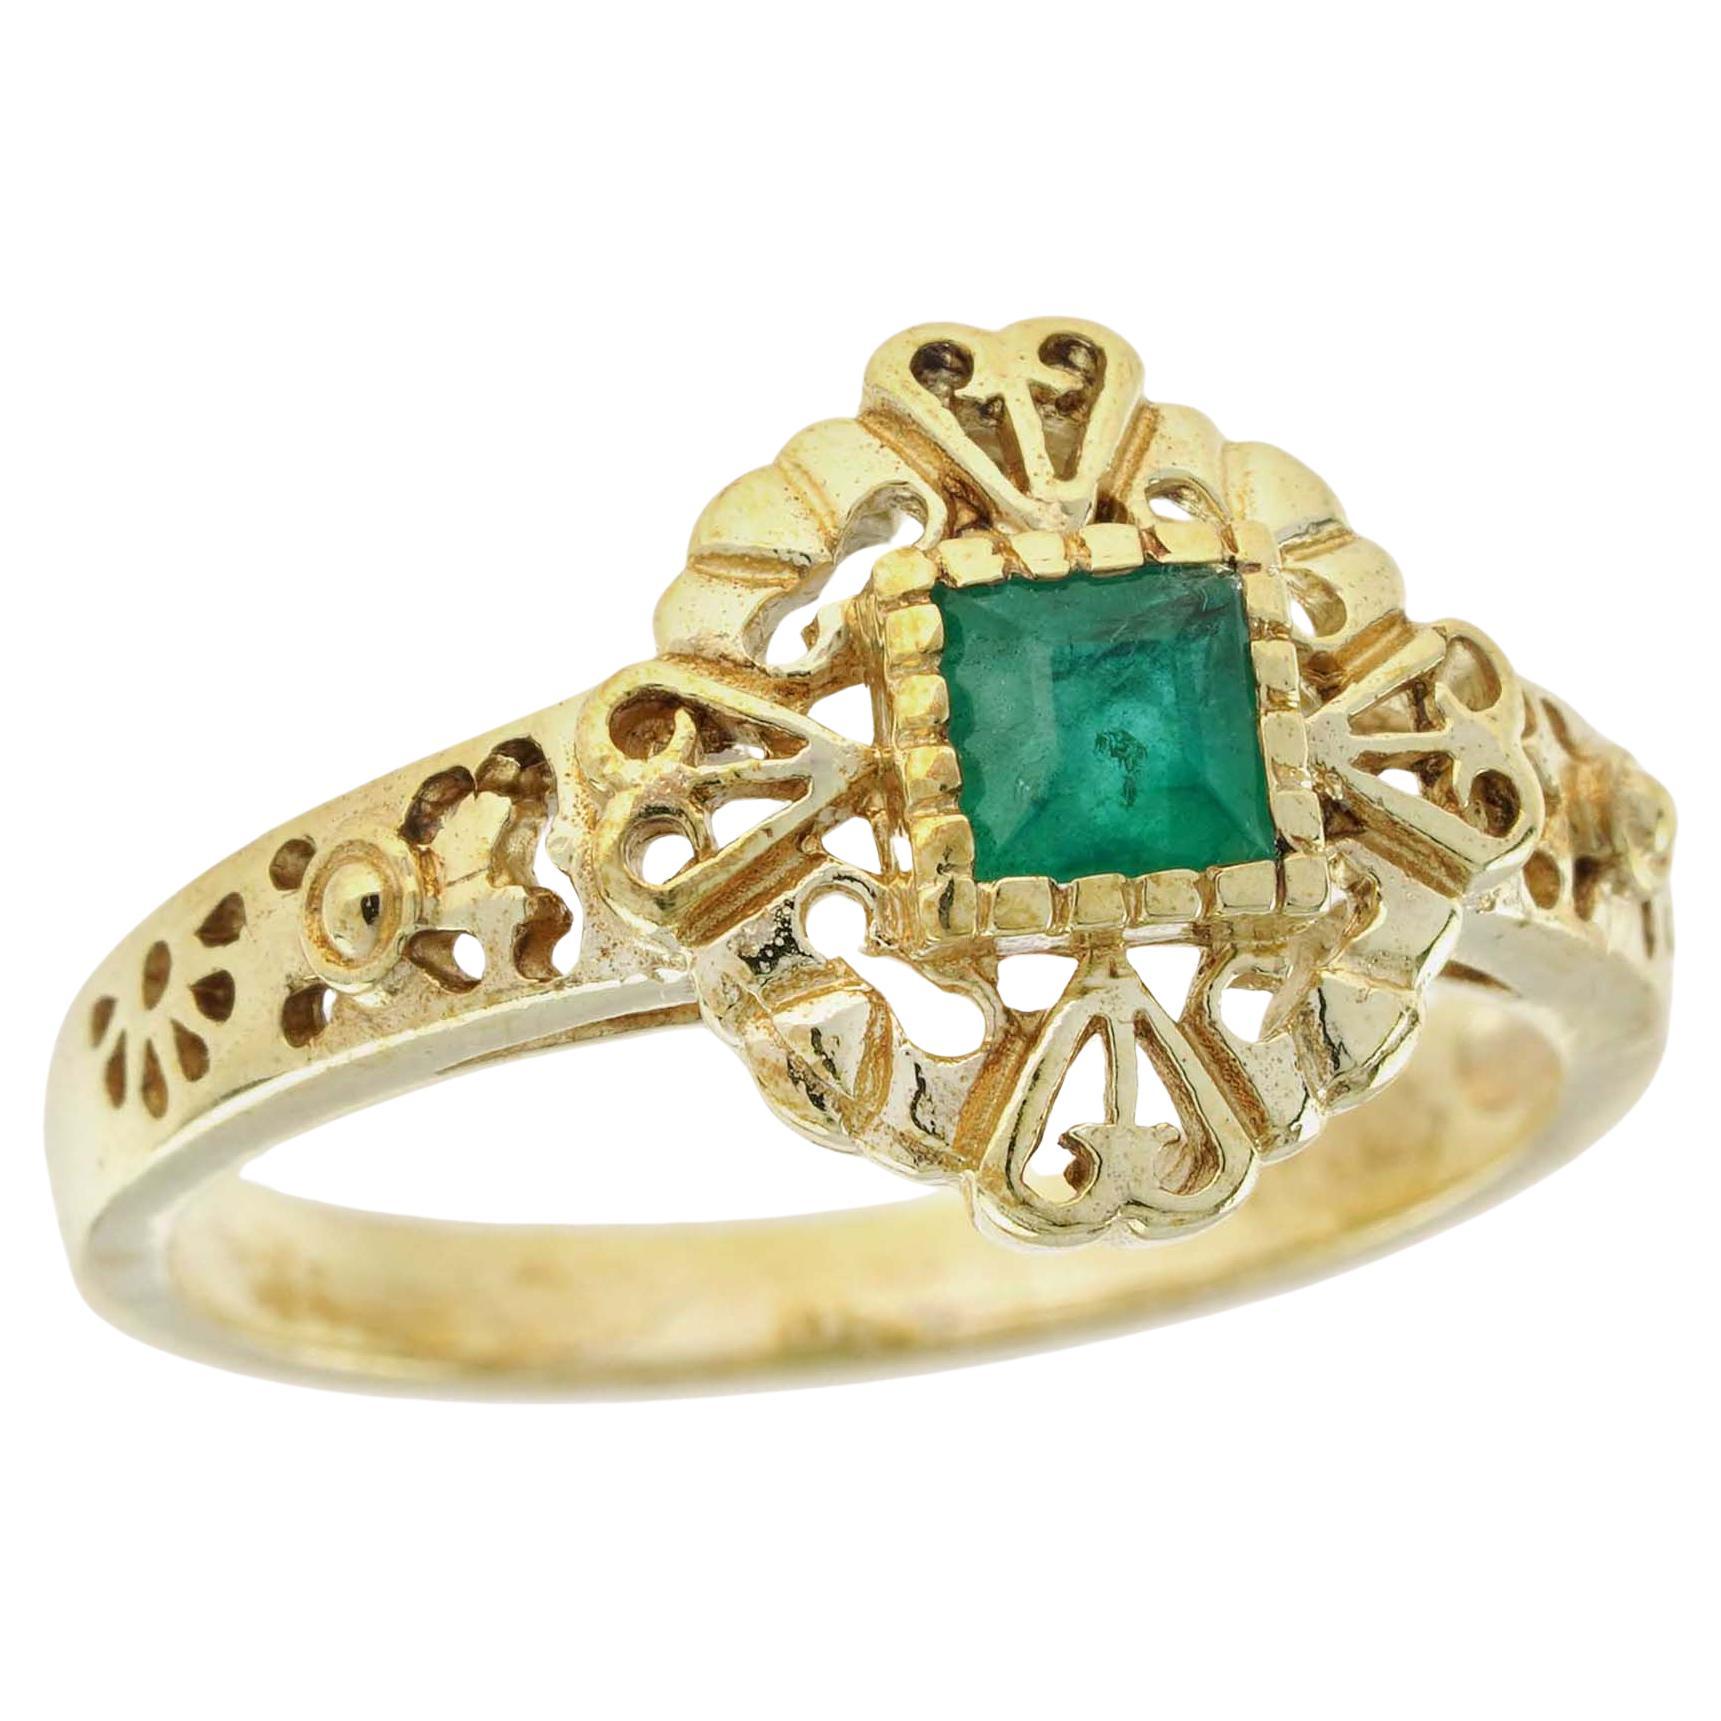 For Sale:  Natural Square Emerald Vintage Style Solitaire Heart Filigree Ring in 9K Gold